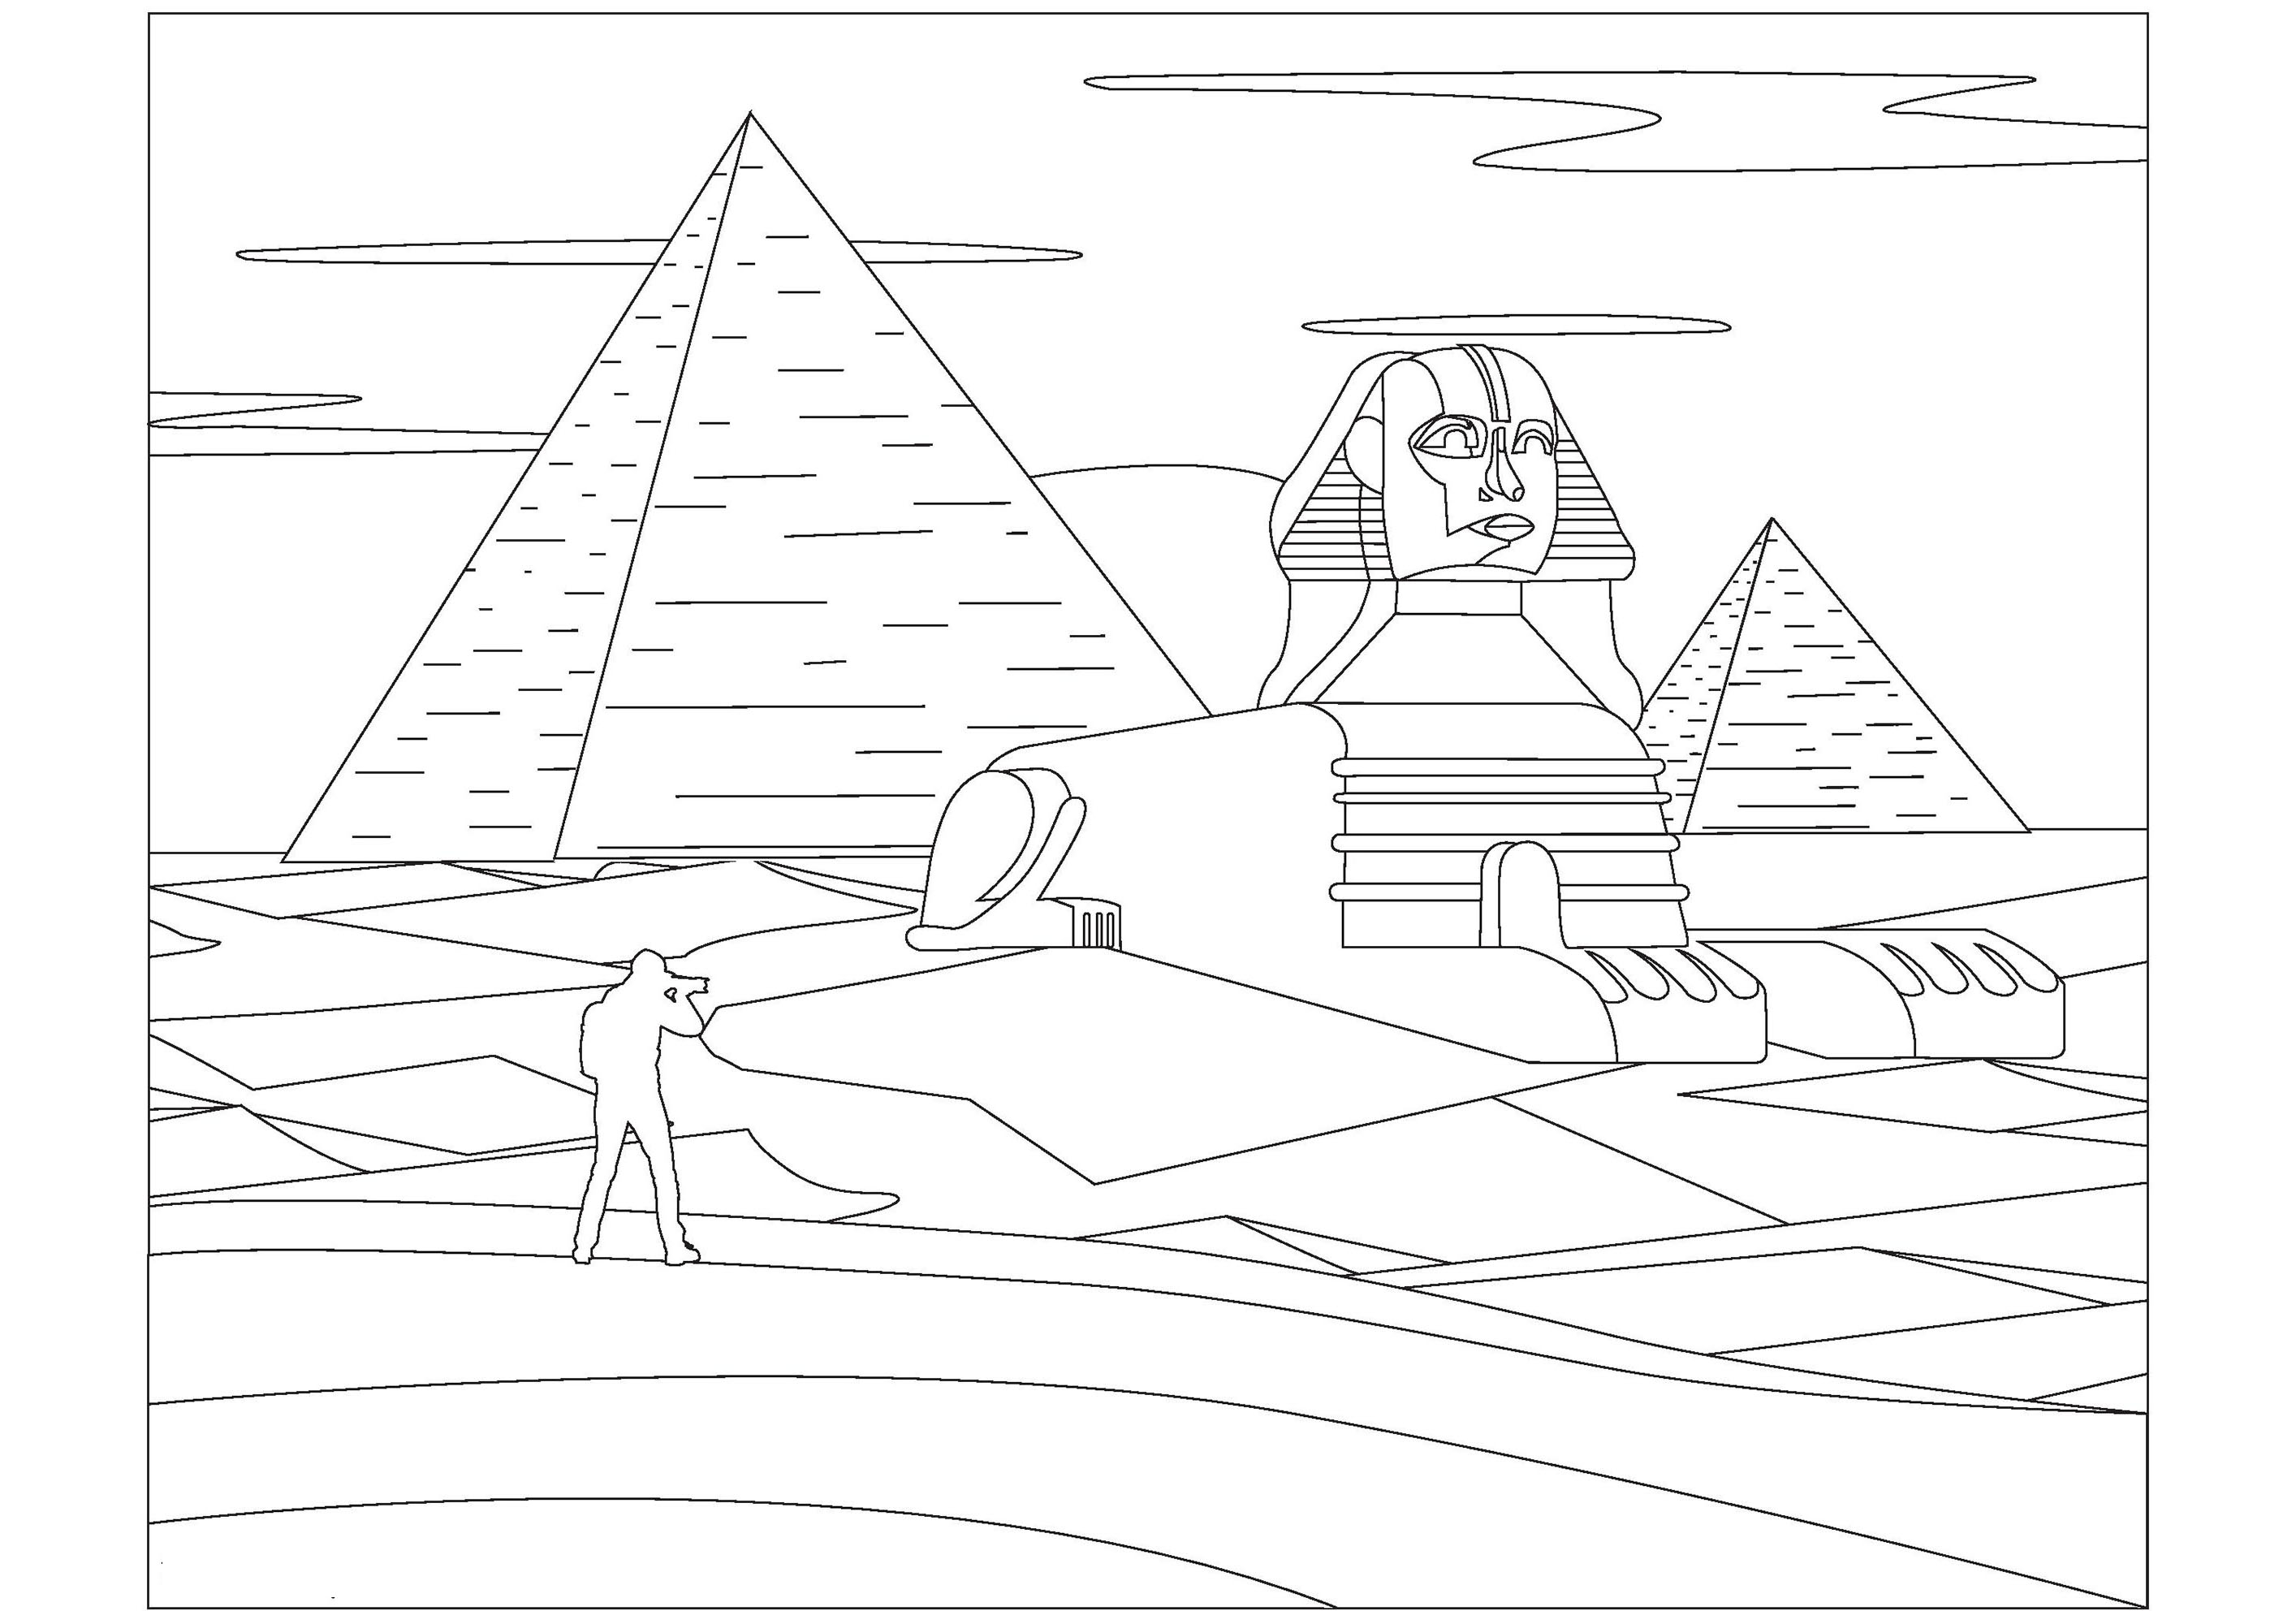 Coloring of the Sphinx and the Pyramids in Egypt. The Sphinx is a stone statue that was built a long time ago in Egypt. It has the head of a pharaoh and the body of a lion. The Pyramids are very large and ancient stone buildings built in Egypt as well, they were used as tombs for the Pharaohs.